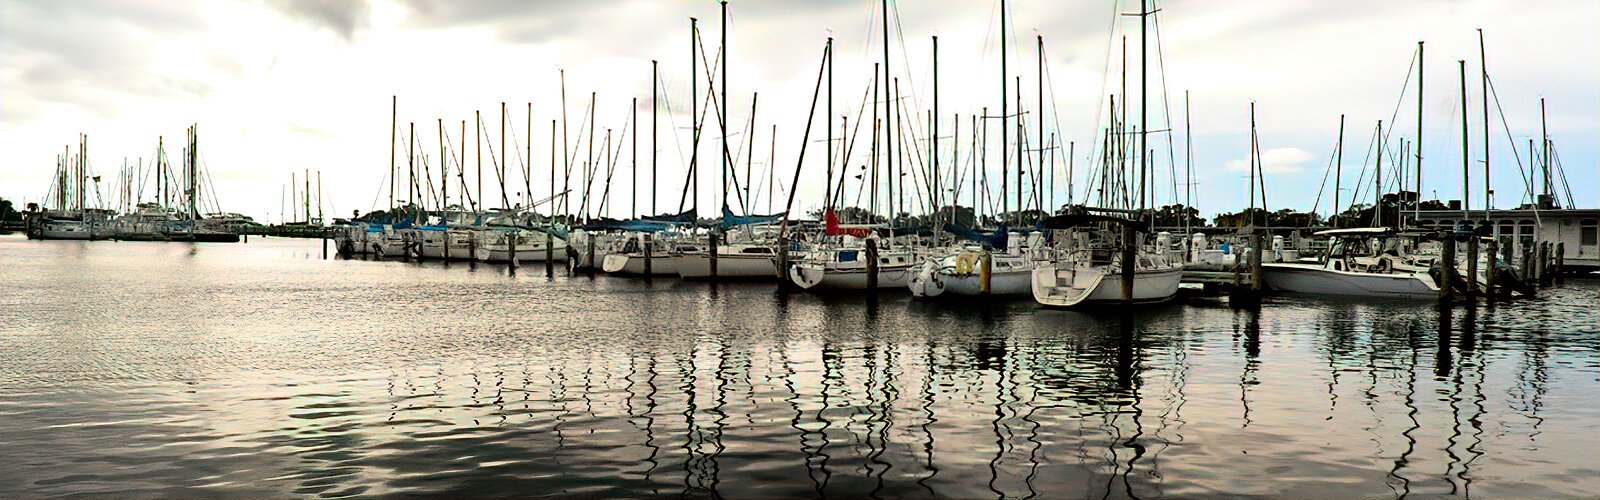 Sailboats dance in St. Pete’s Municipal Marina, an anchor of the city's Waterfront Arts District.